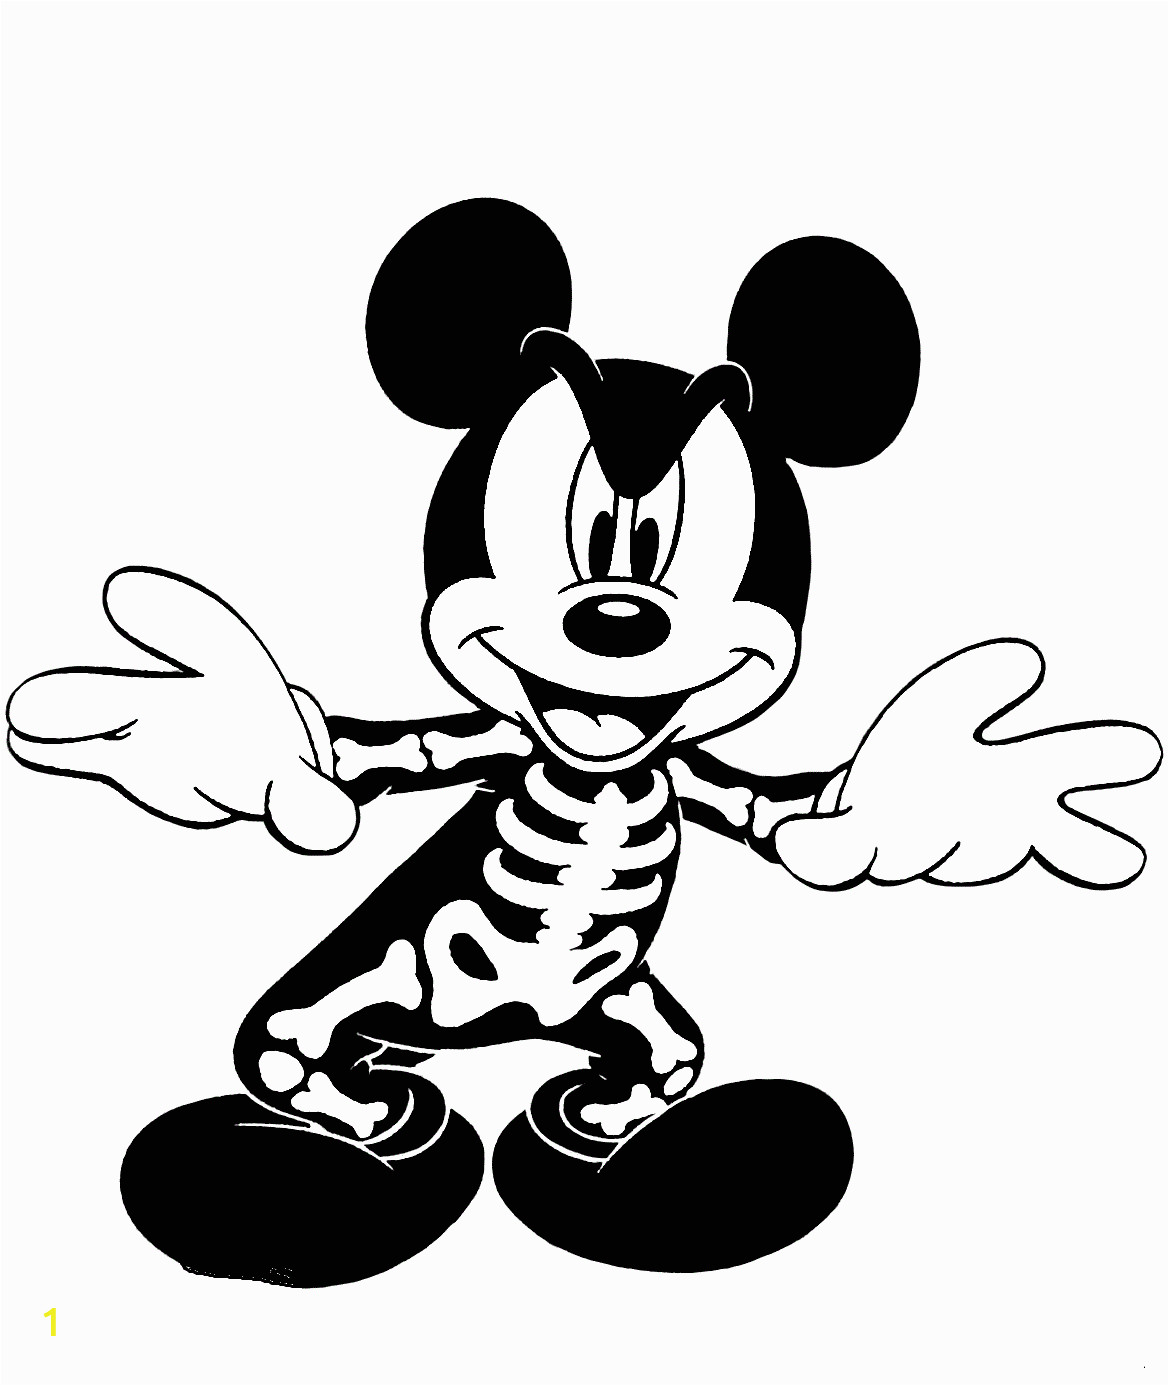 Free Printable Mickey Mouse Halloween Coloring Pages 30 Free Printable Disney Halloween Coloring Pages